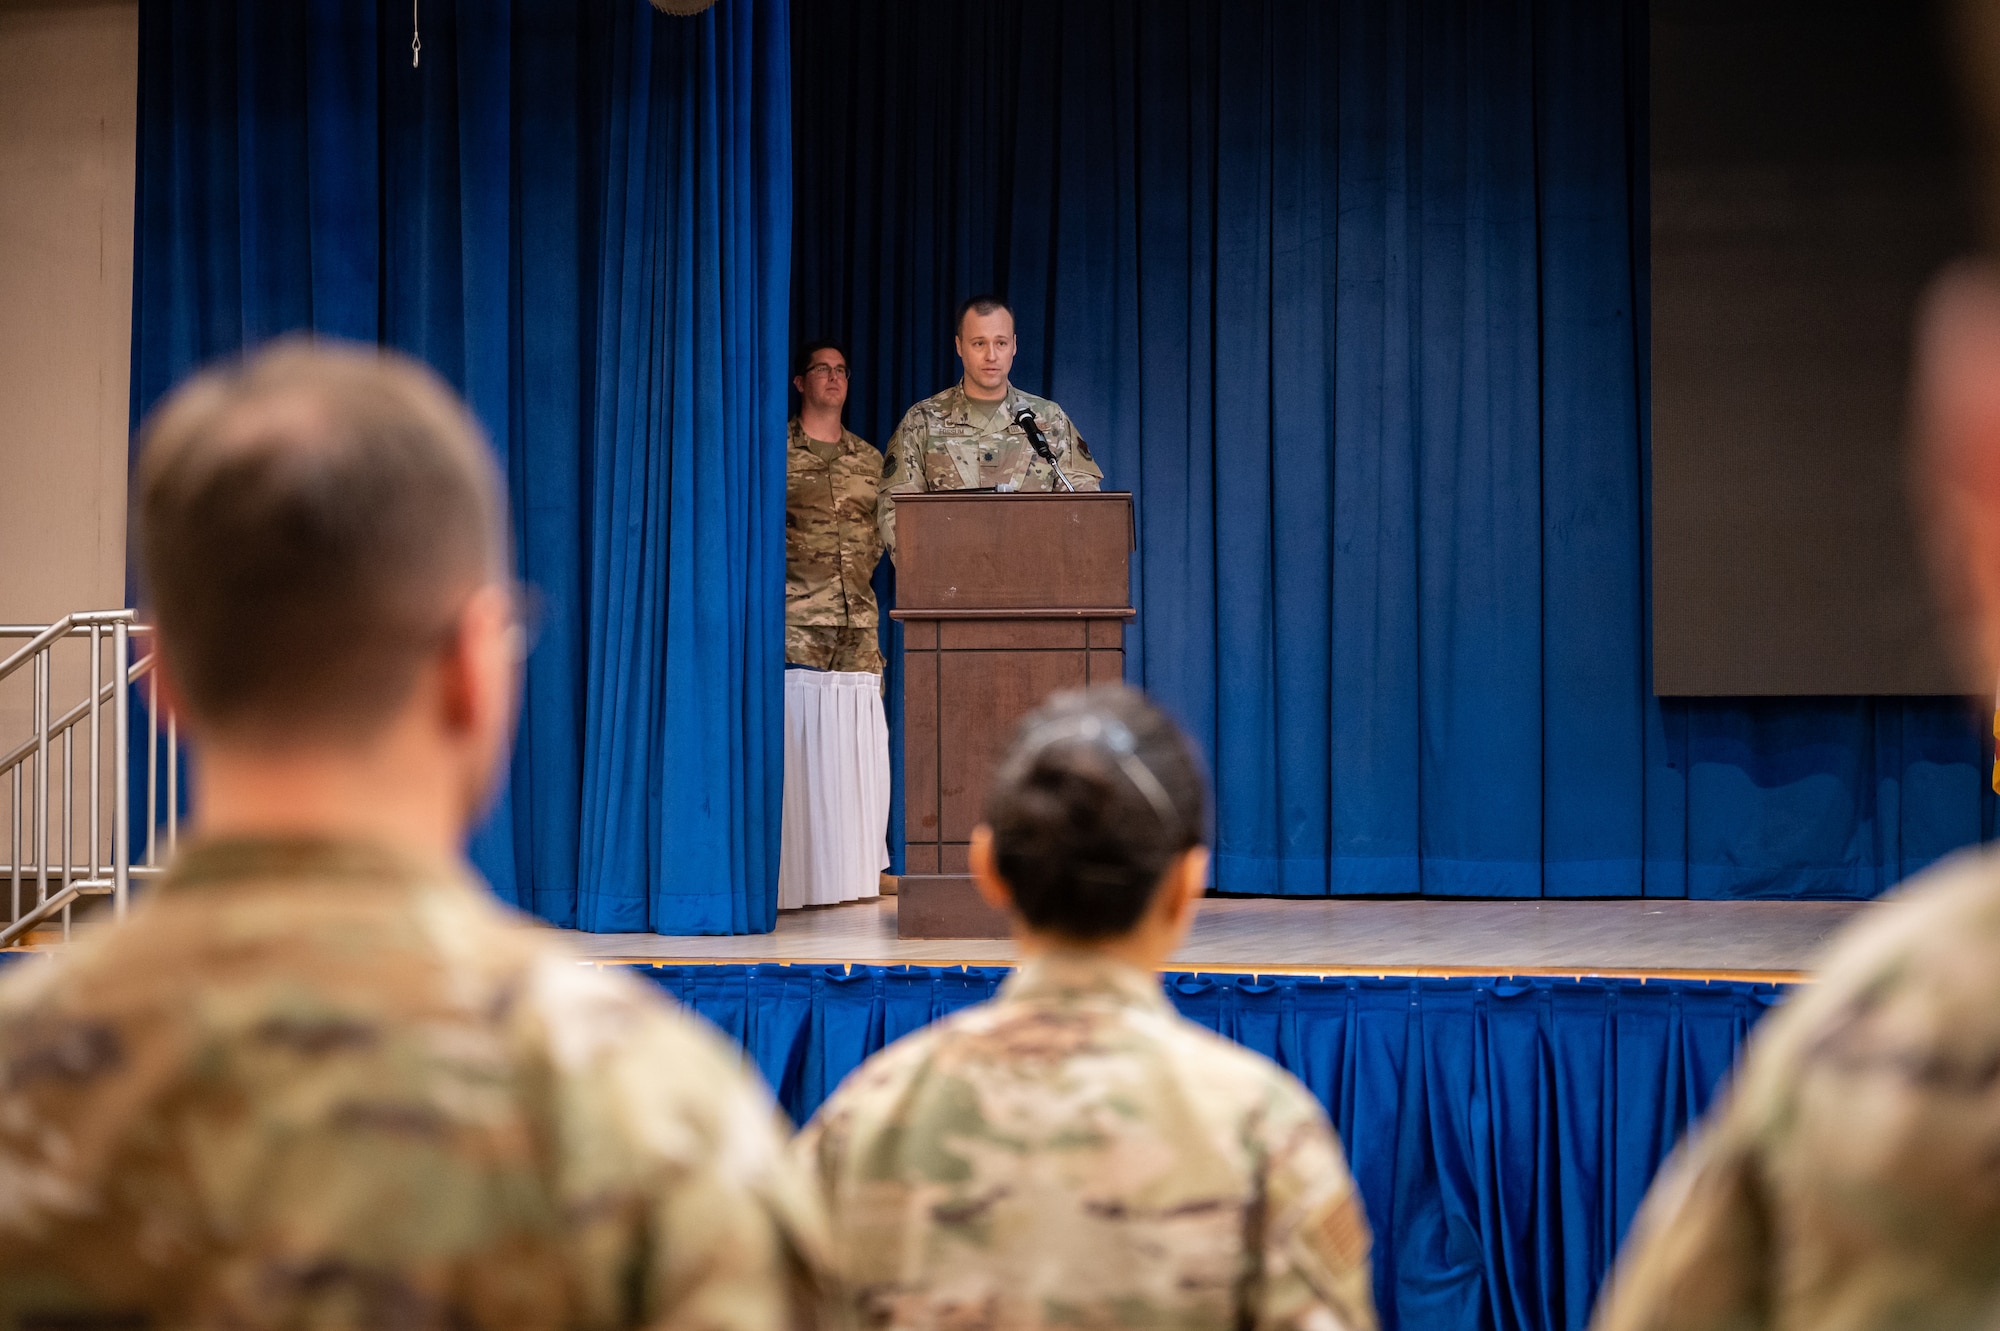 U.S. Air Force Lt. Col. Adam Fossum, 6th Intelligence Squadron incoming commander, provides his first speech to his squadron during the 6th IS change of command ceremony at Osan Air Base, Republic of Korea, June 14, 2023. Fossum took command of the 694th ISS during the symbolic change of command ceremony. (U.S. Air Force photo by Senior Airman Thomas Sjoberg)